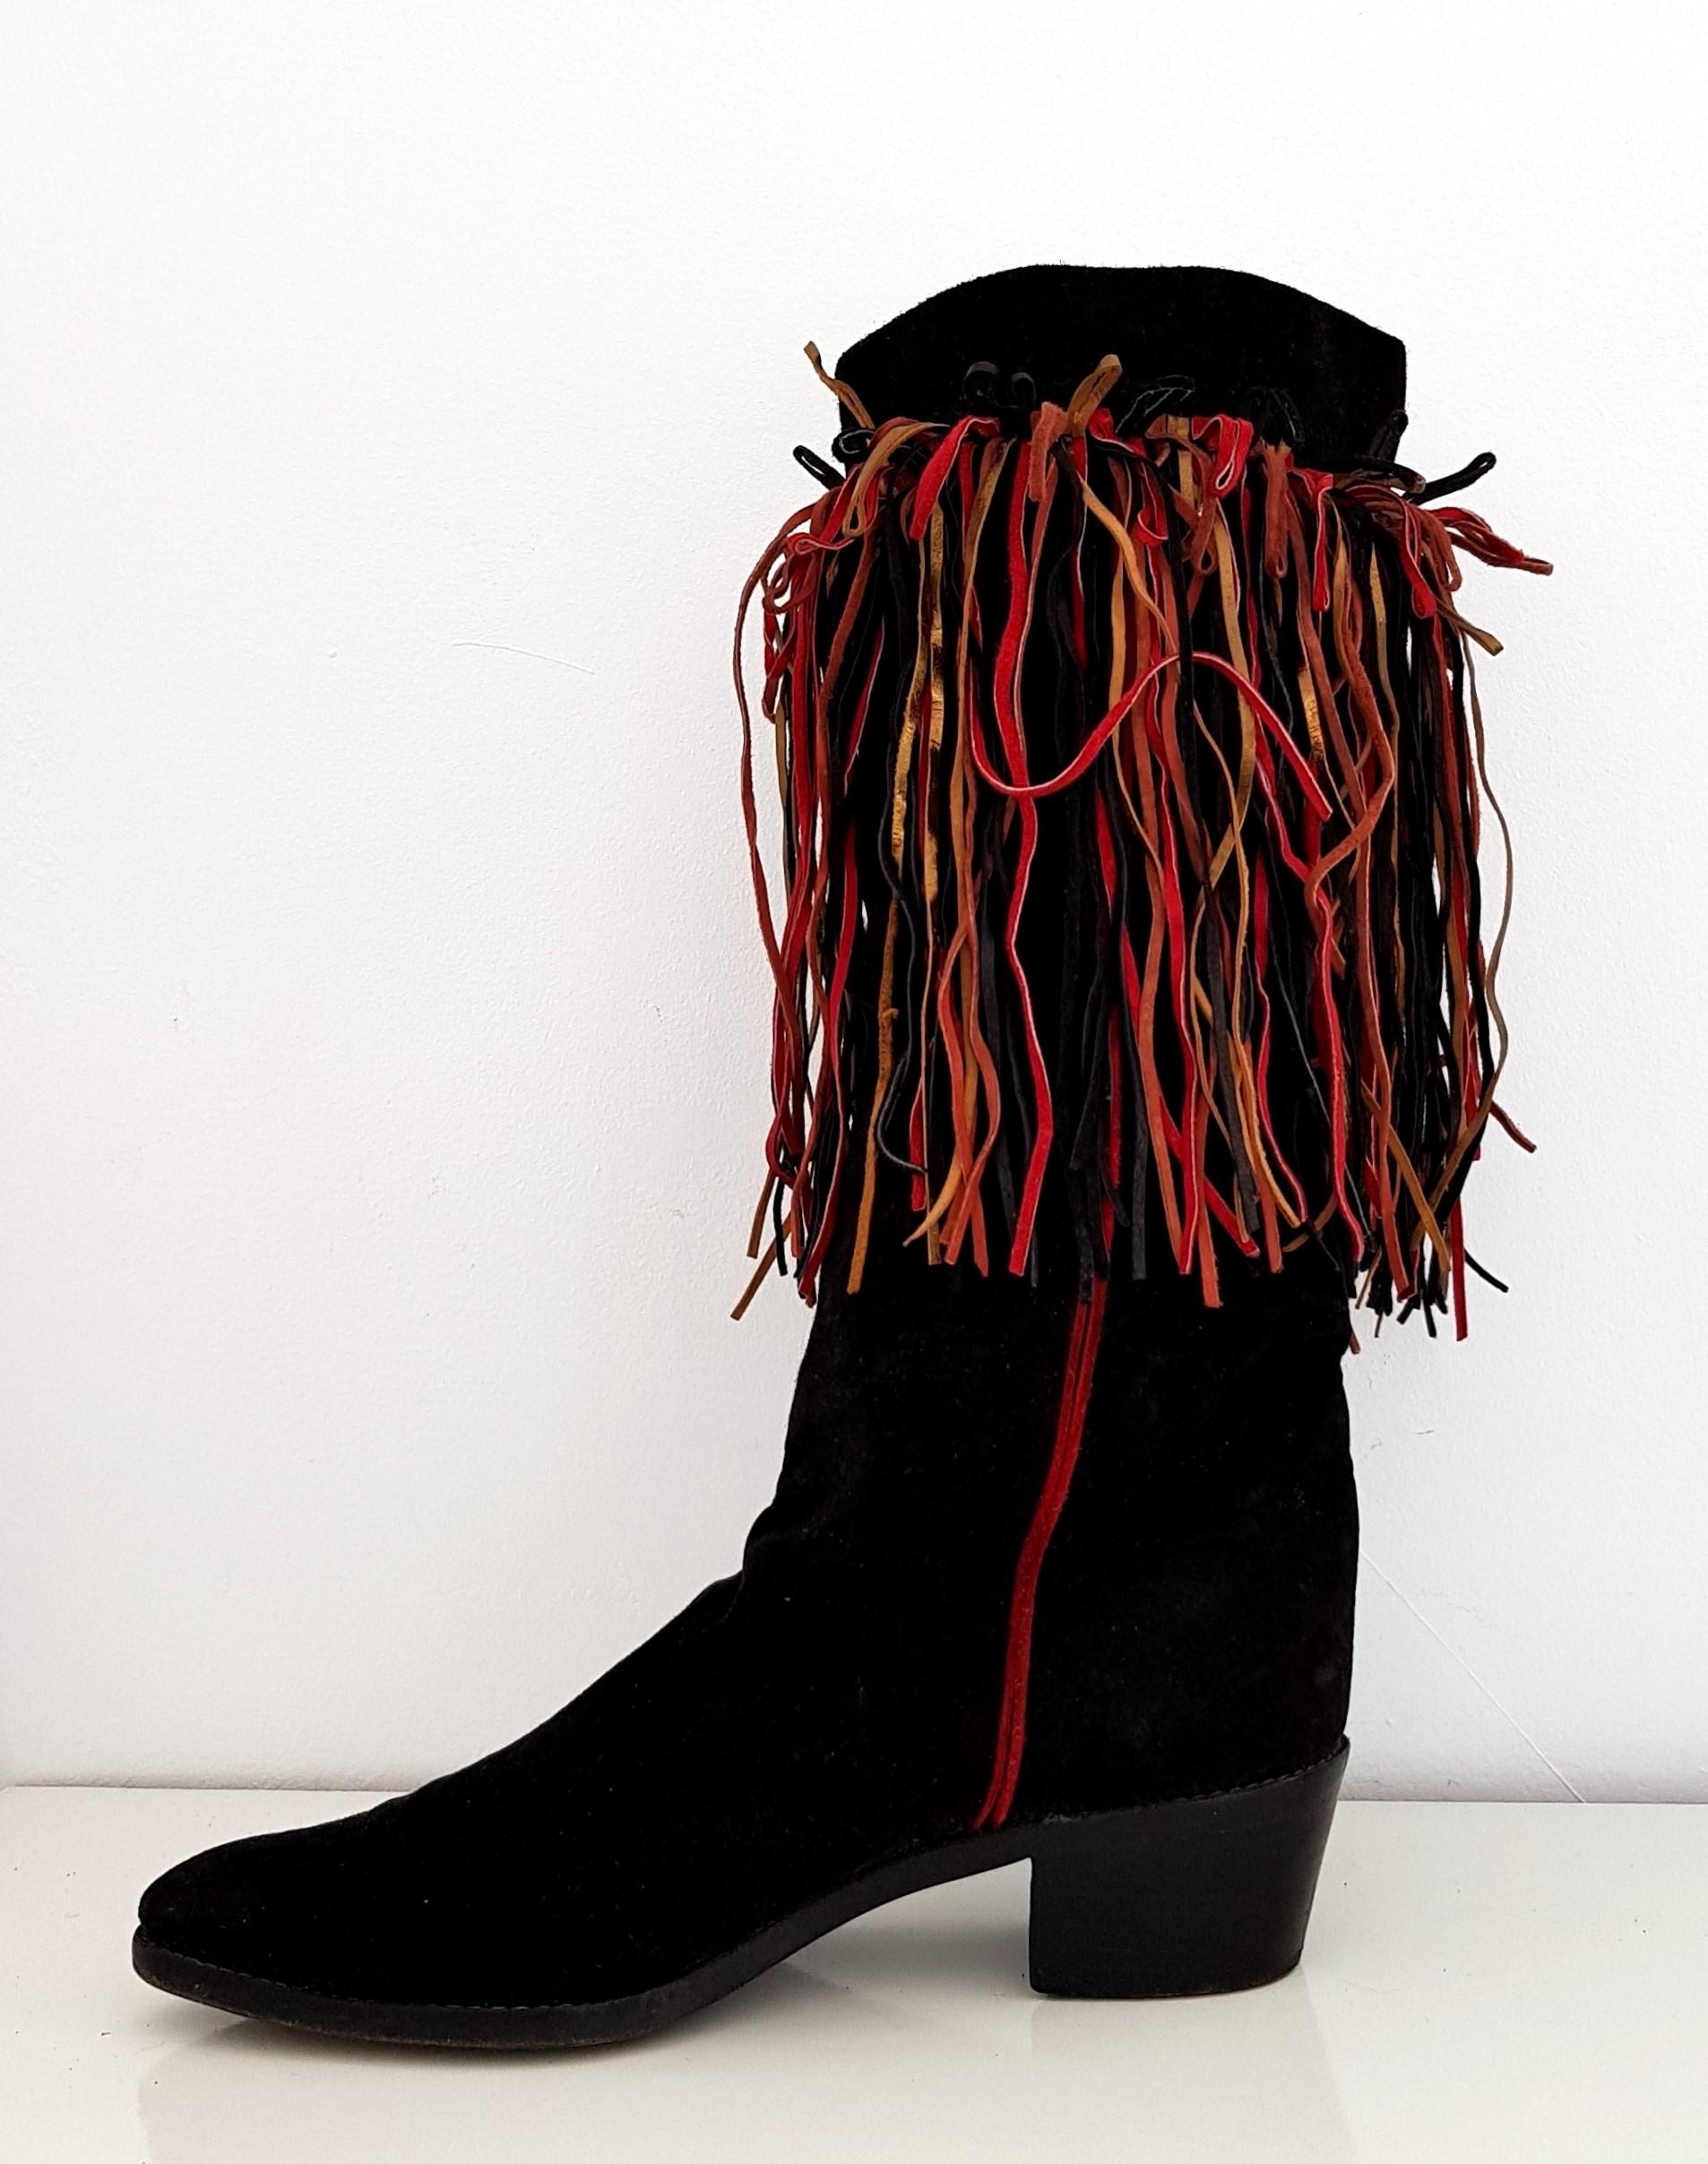 Maud Frizon Black Suede Boots with Leather Laces in 3 different colors: Red, Beige and Black.
Conditions: Very good
Heel height: 5 cm
Laces lenght: 20 cm
Boots height: 38.5 cm
Size: 39 1/2
Made in Italy
